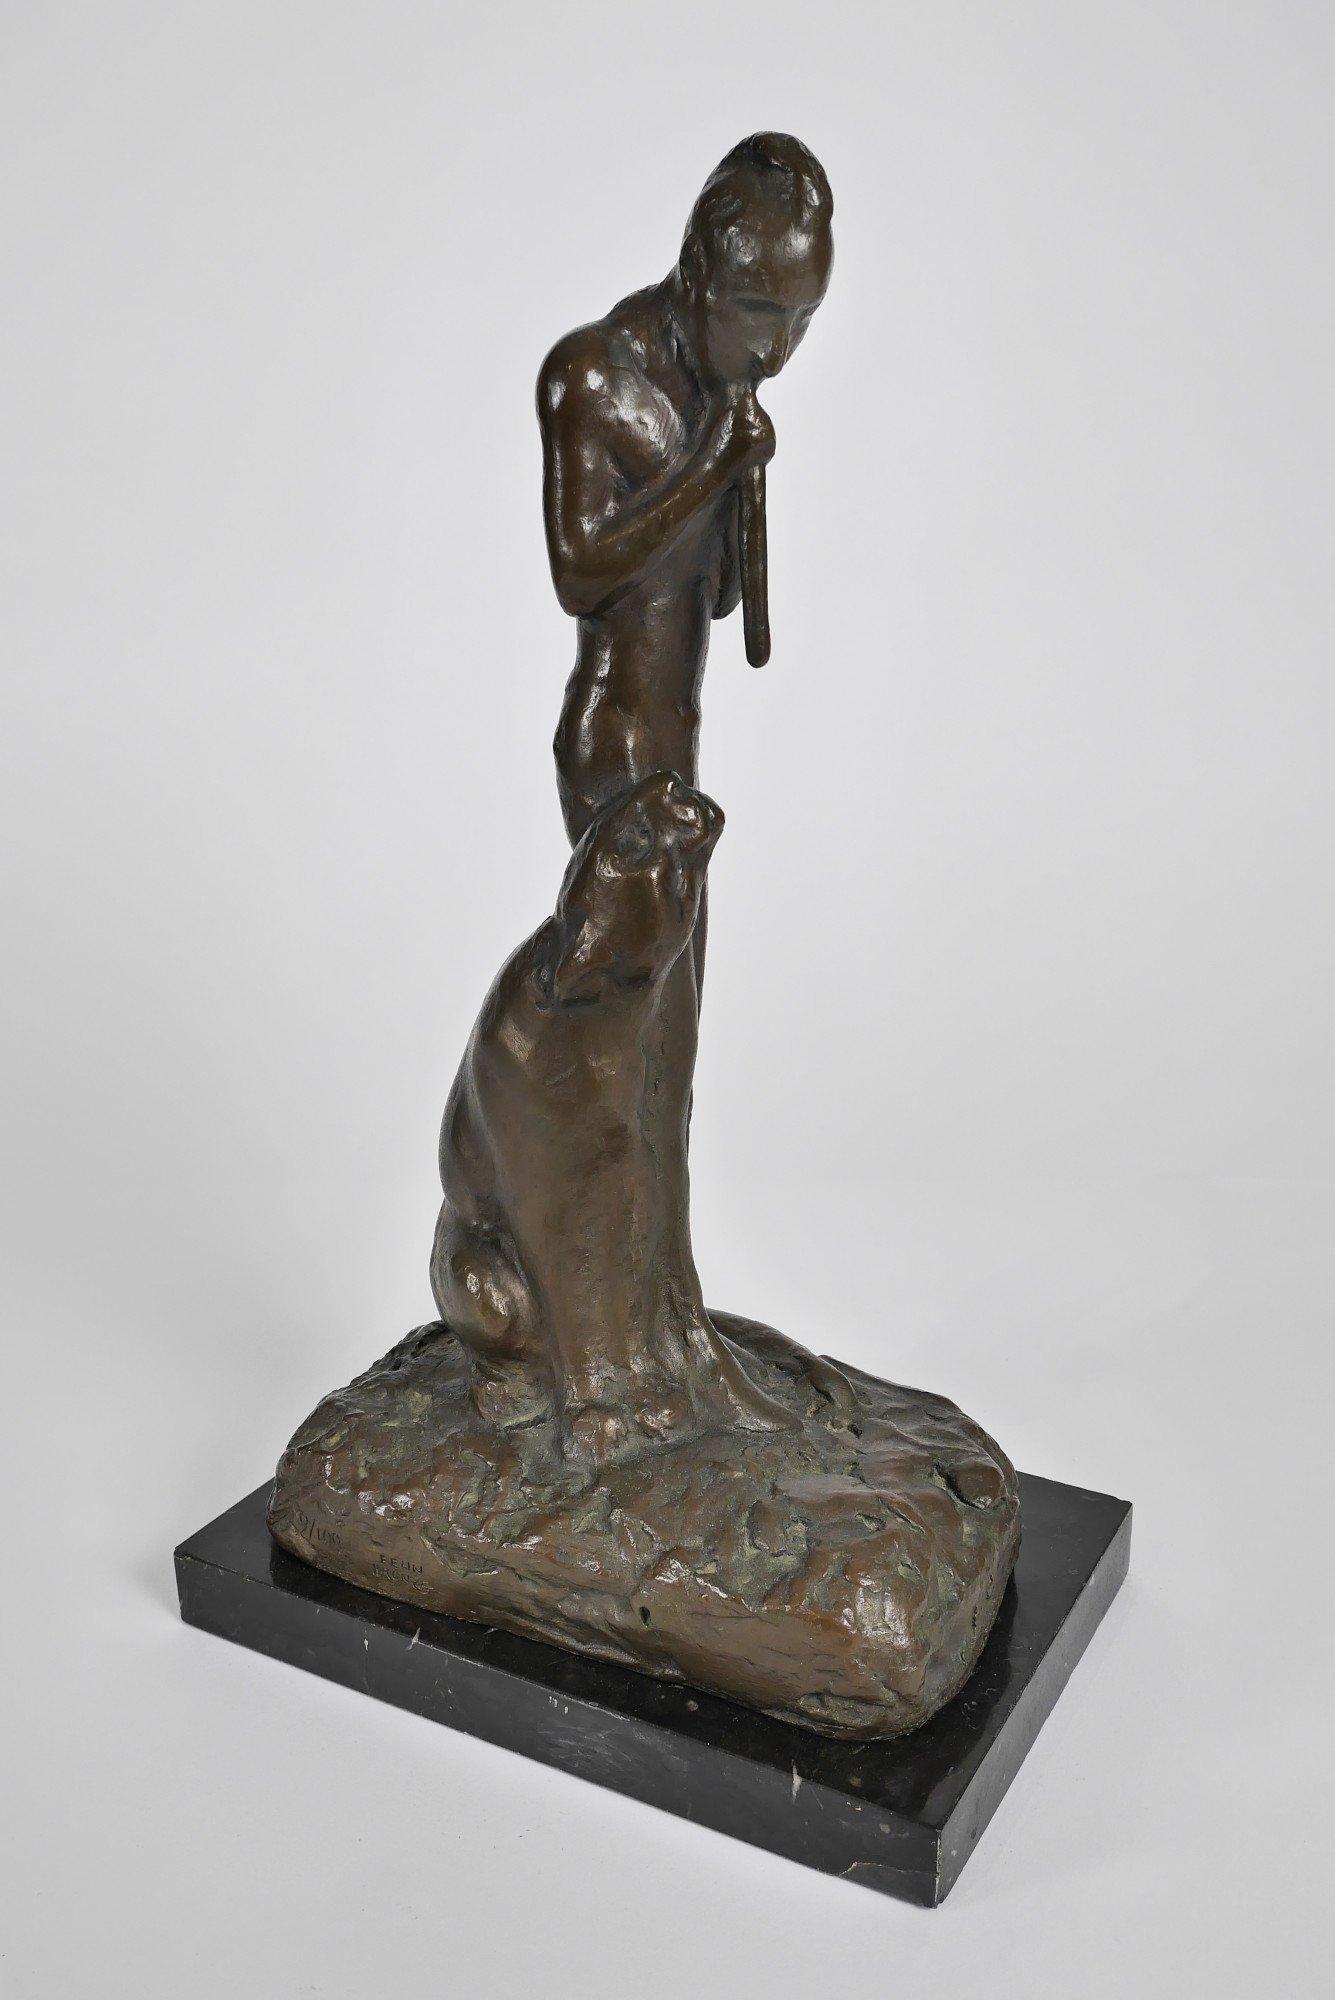 Man with Flute and Cougar, American 19th/20th century bronze w/ marble base